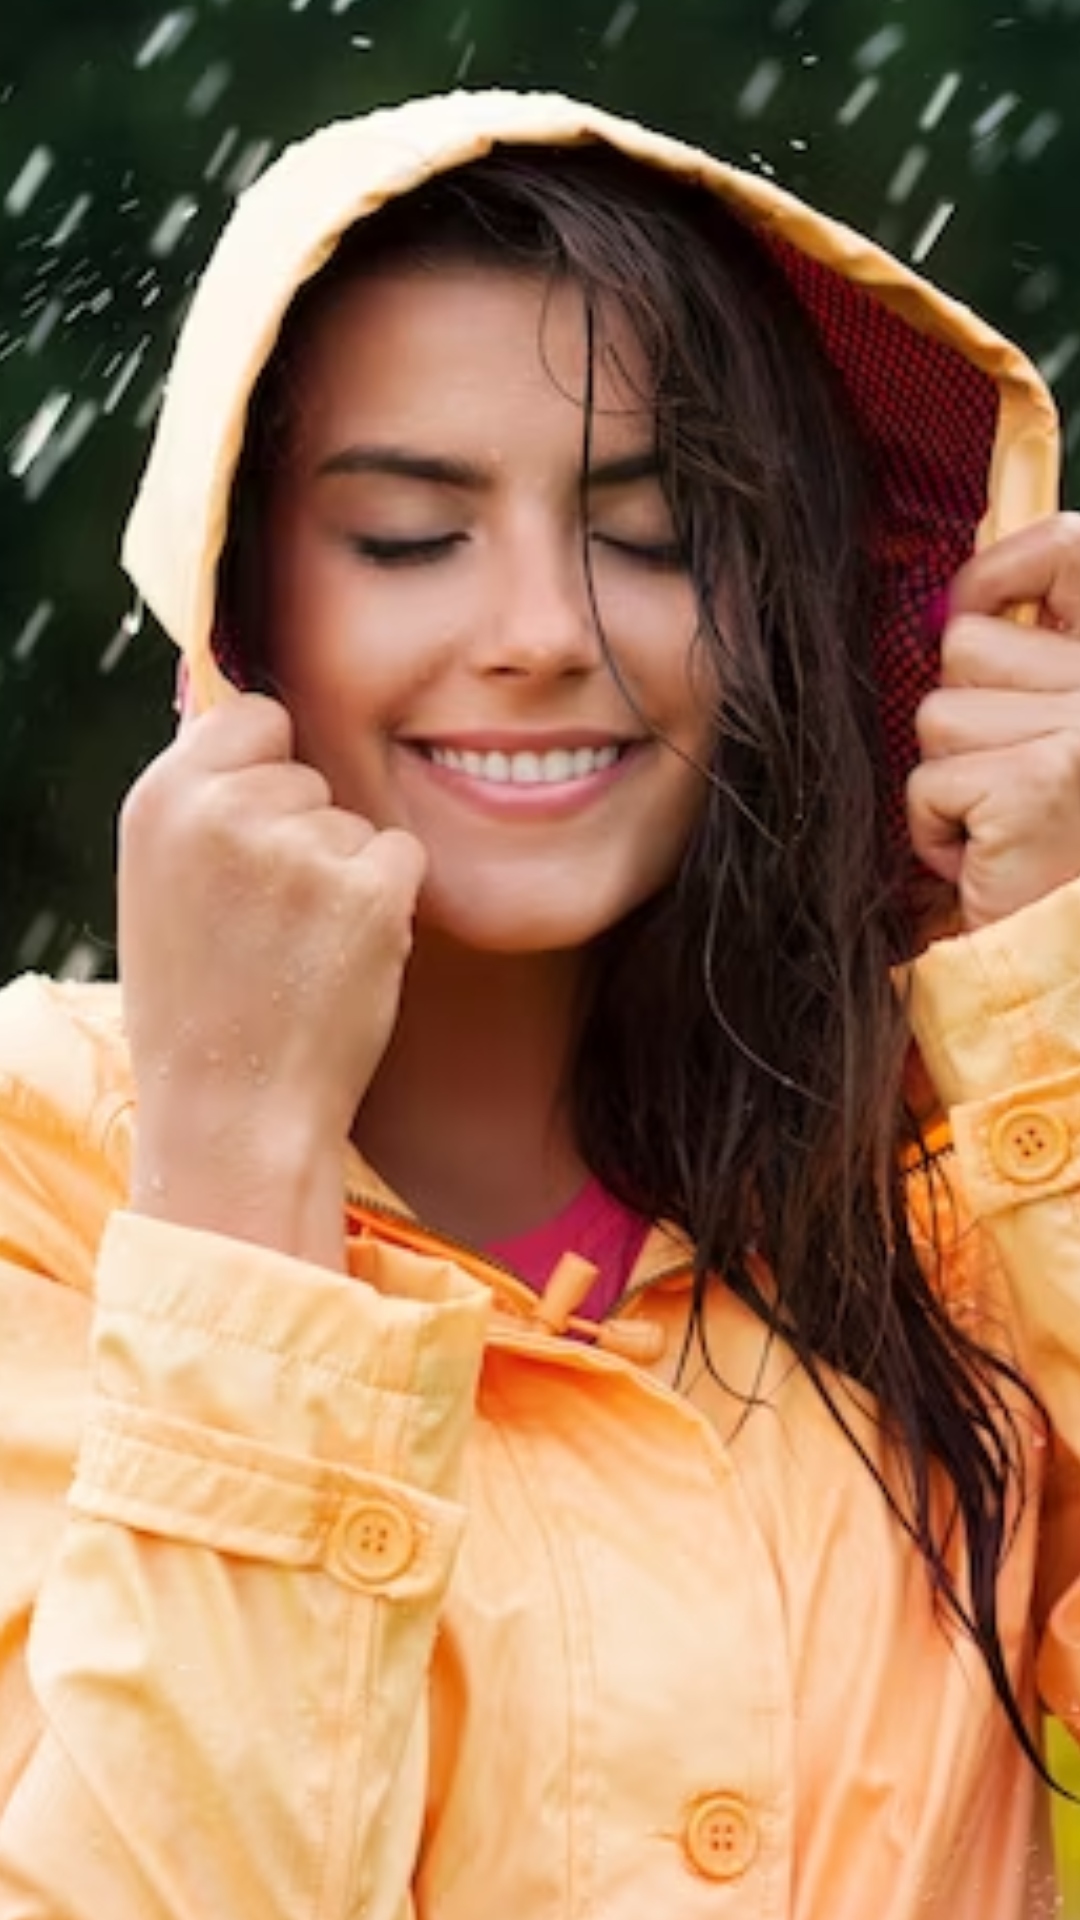 10 skincare tips to follow this monsoon